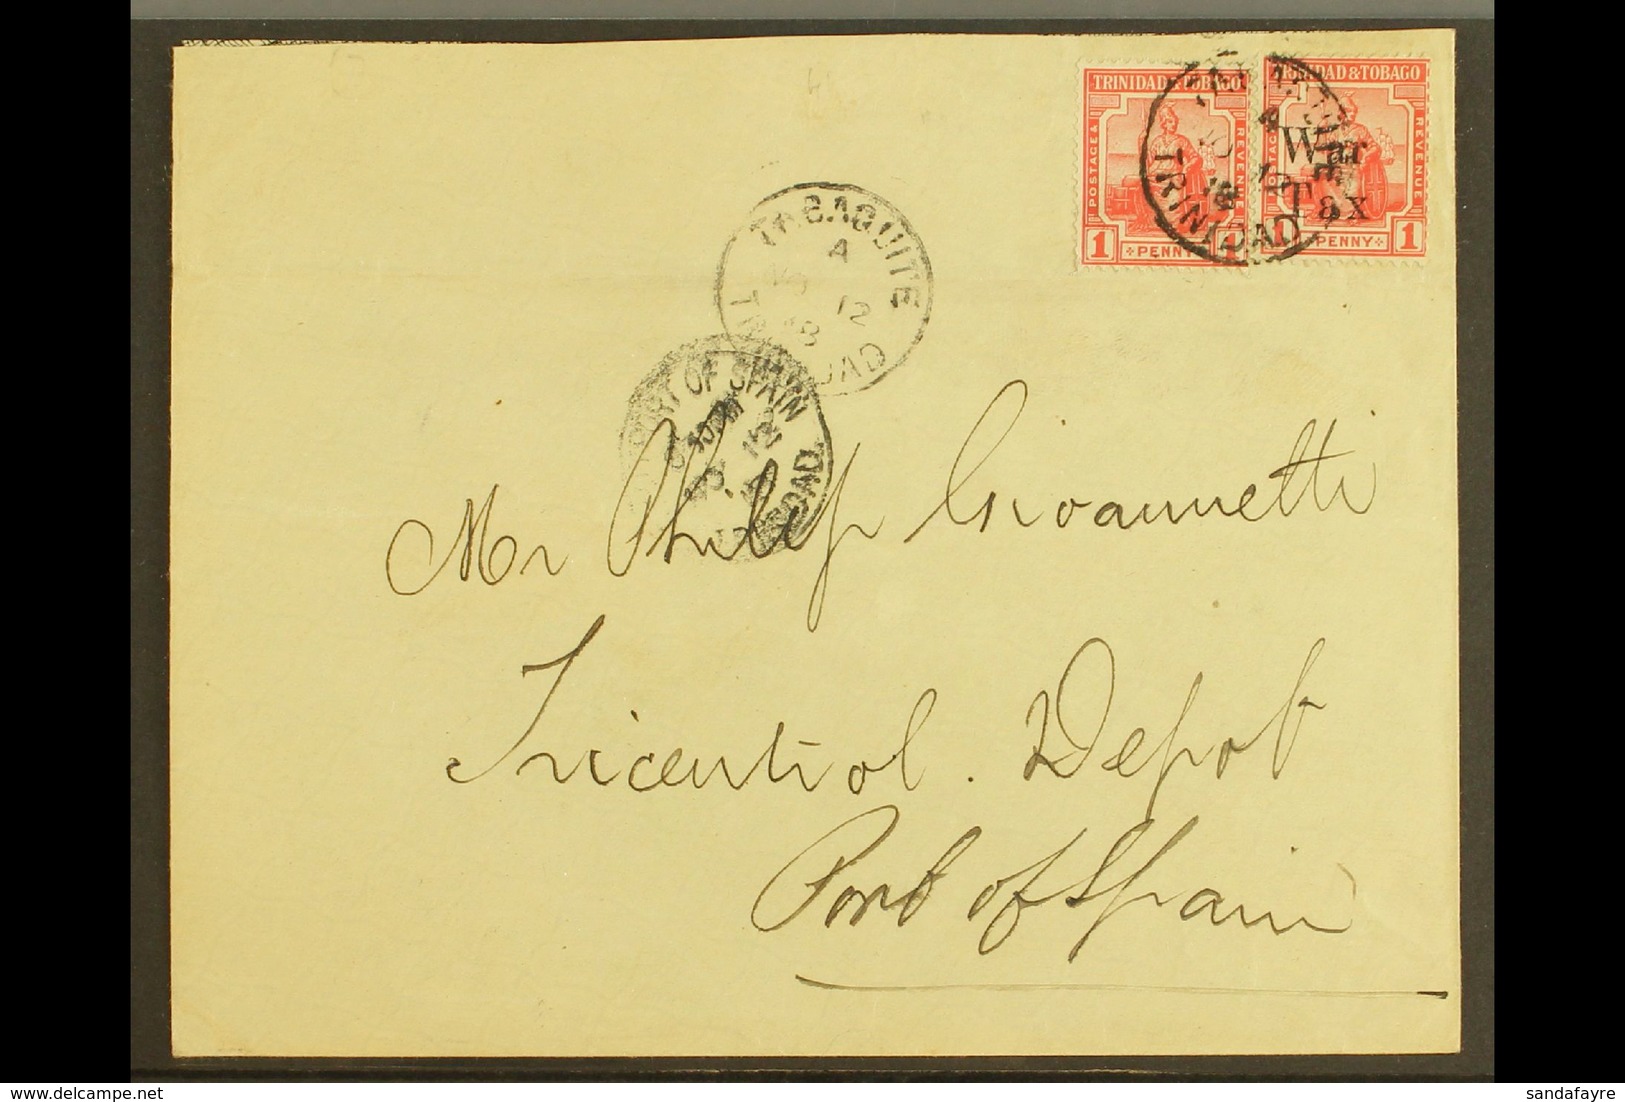 1918 (12 Nov) Cover To Port Of Spain, Bearing 1913-23 1d (SG 150) & 1918 1d "War Tax" Opt (SG 189) Tied By "Tabaquite" C - Trinité & Tobago (...-1961)